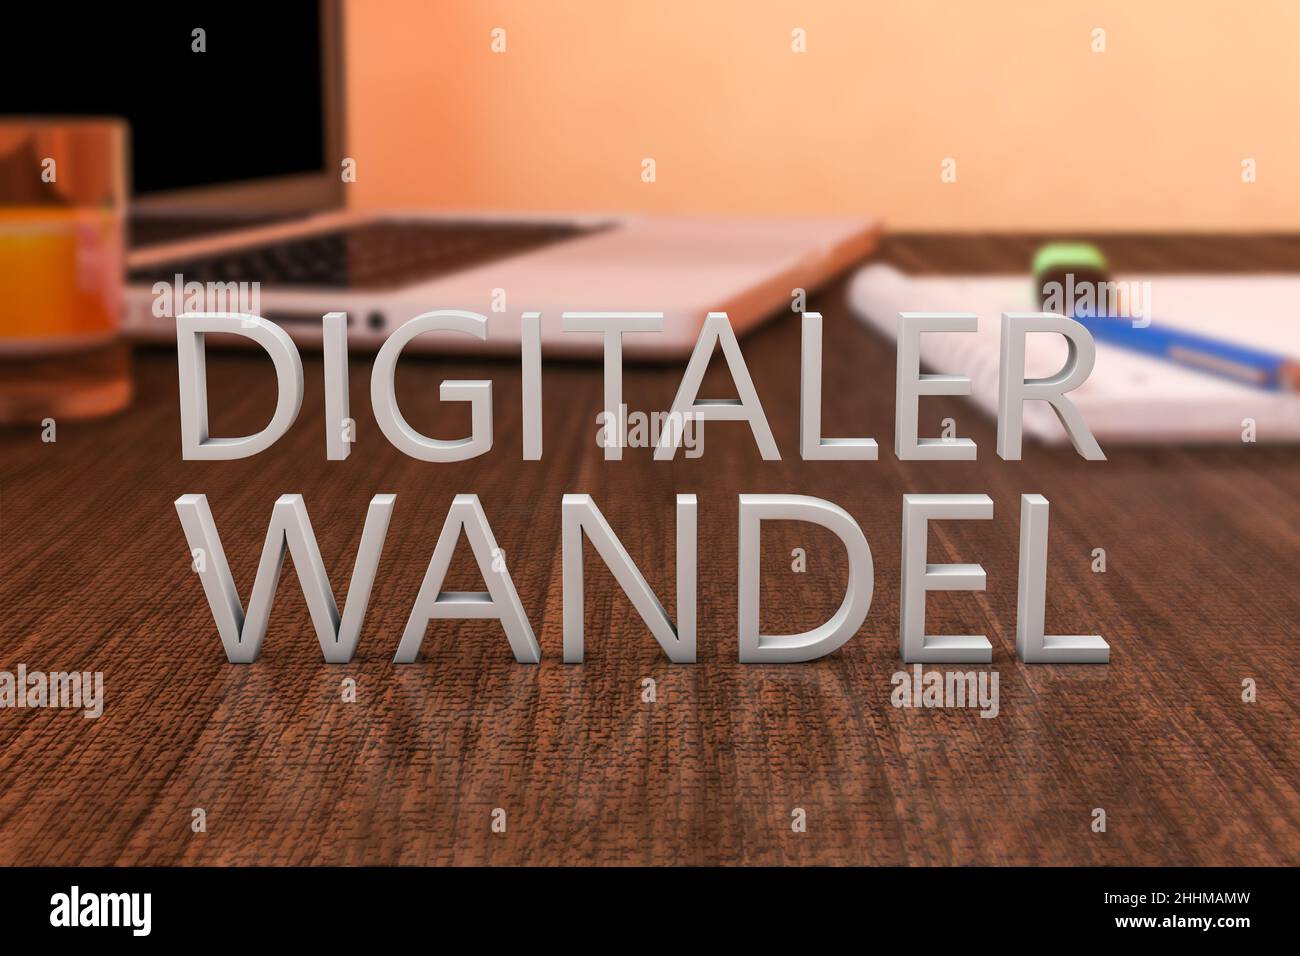 Digitaler Wandel - german word for digital change or digital business transformation - letters on wooden desk with laptop computer and a notebook. 3d Stock Photo